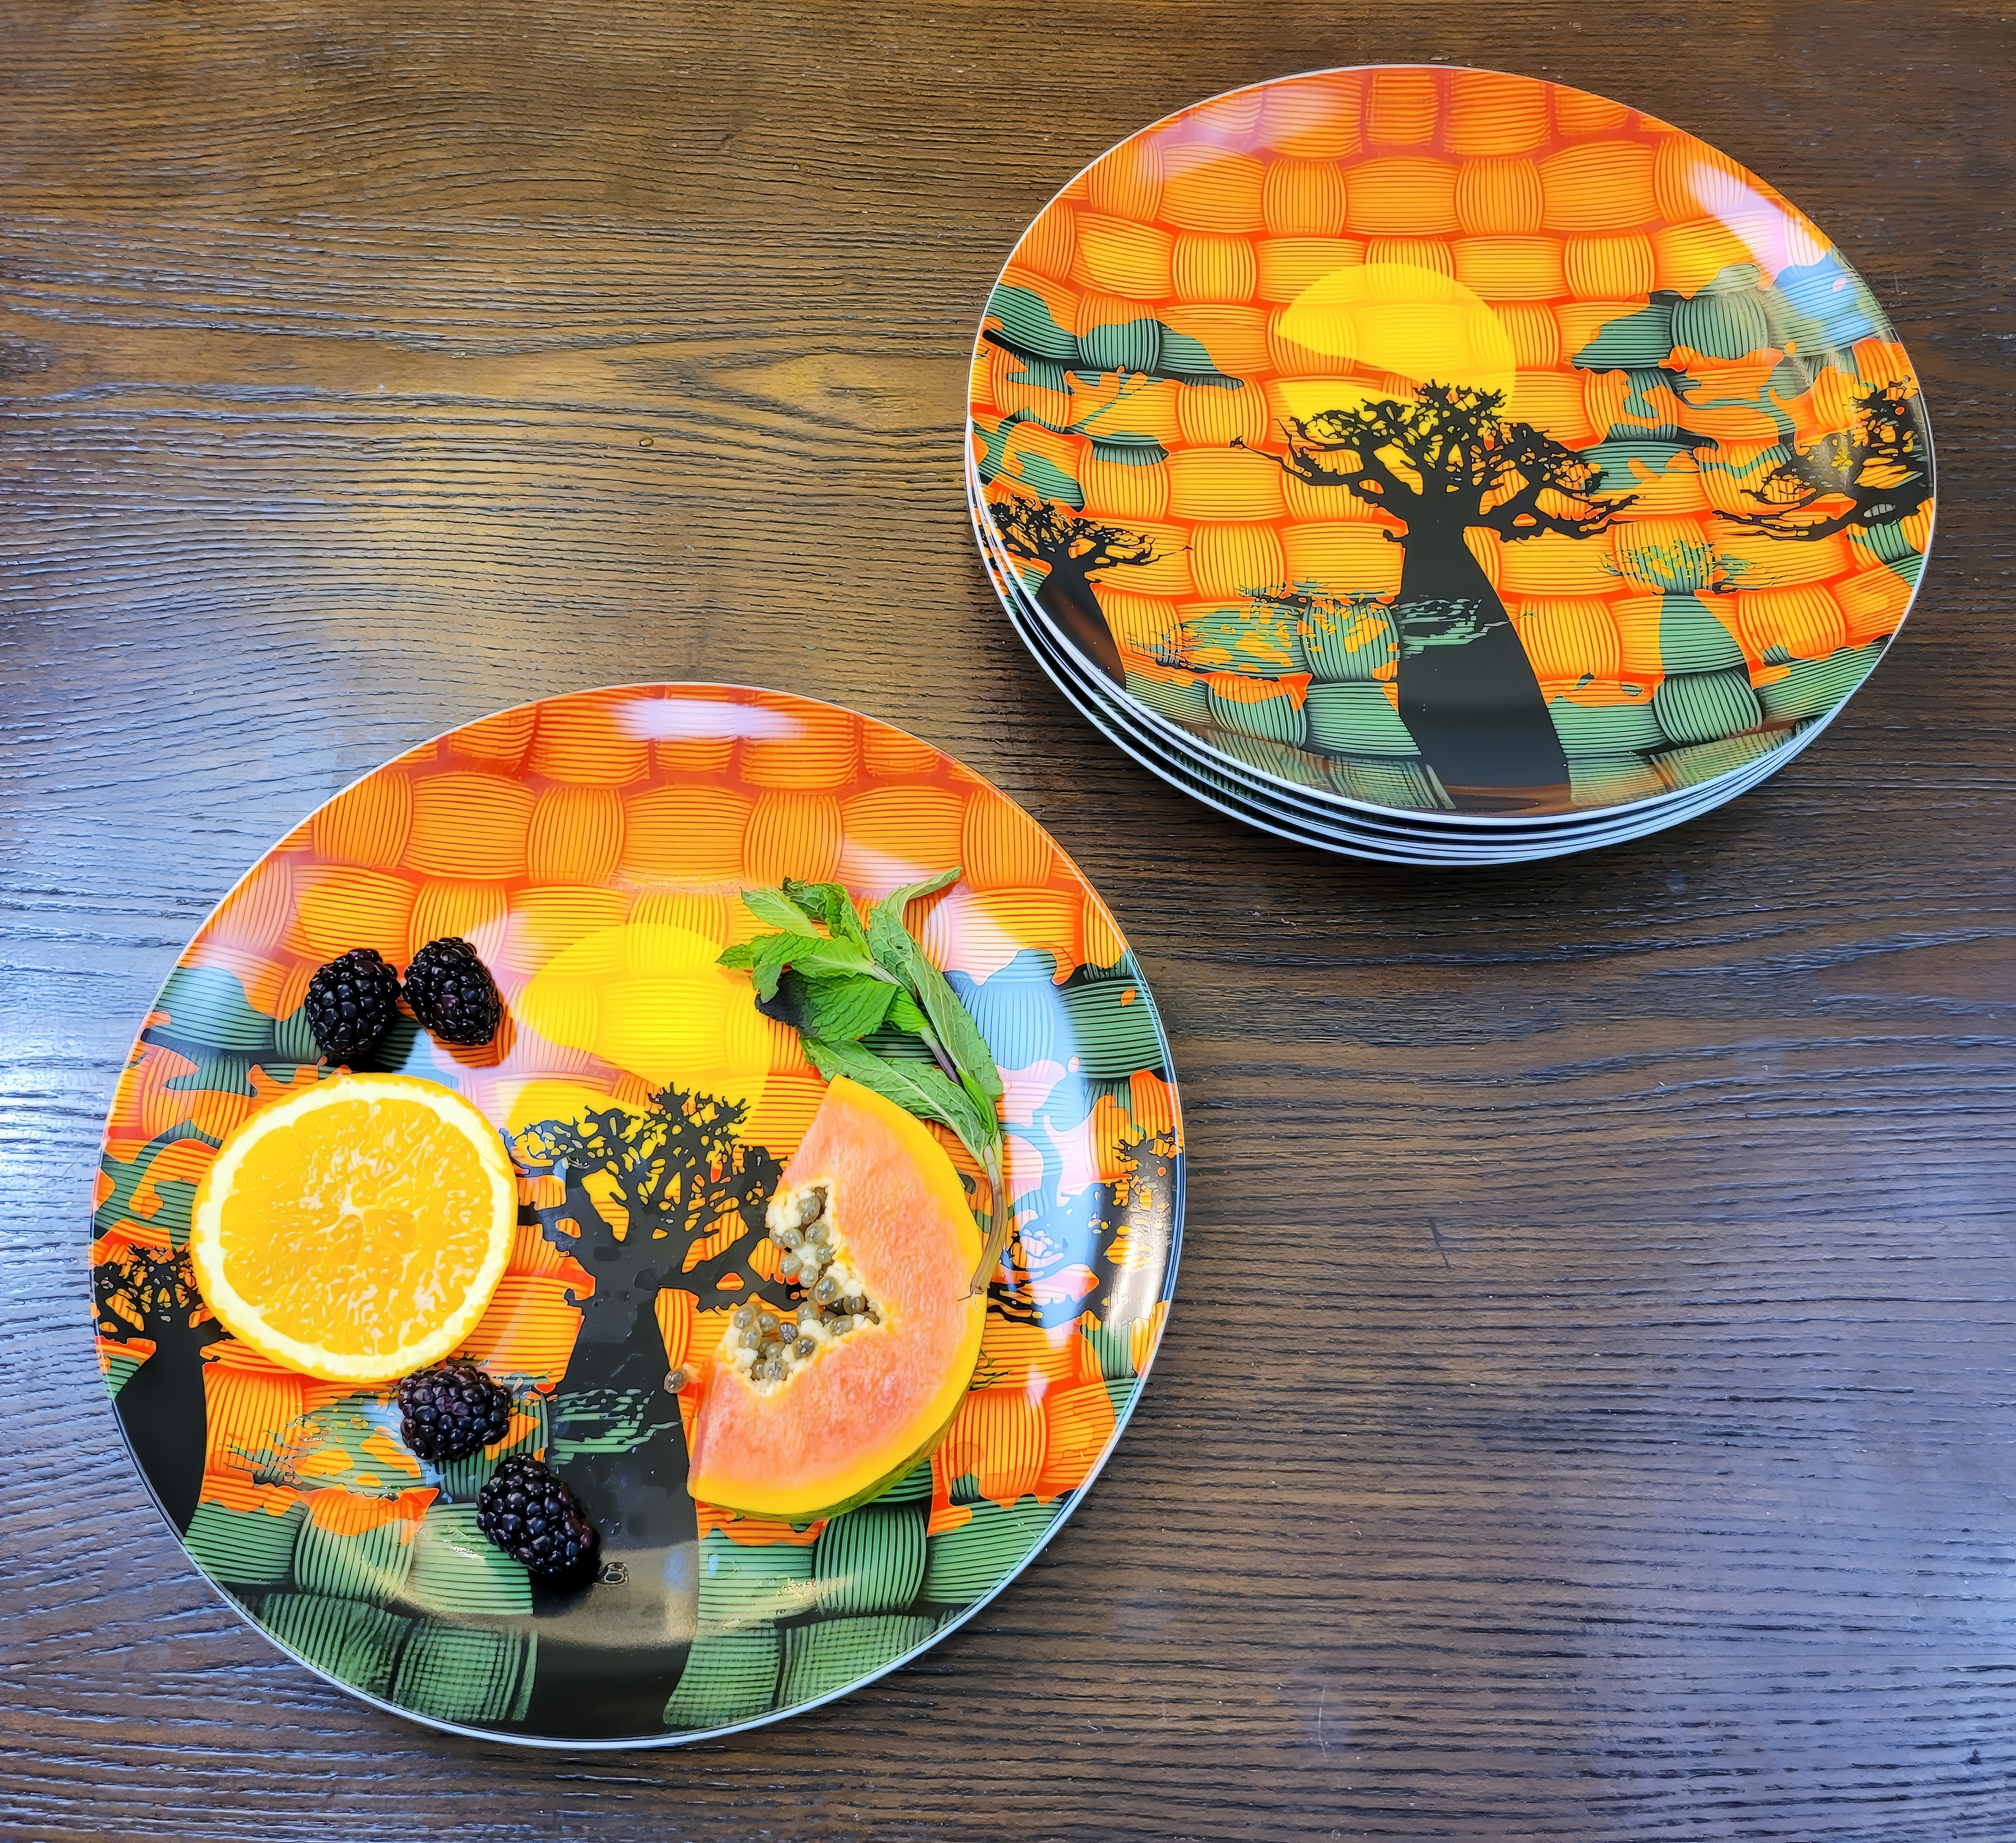 Beautiful ceramic plates with art of a African Baobab forrest. There are fruits on one of the plates